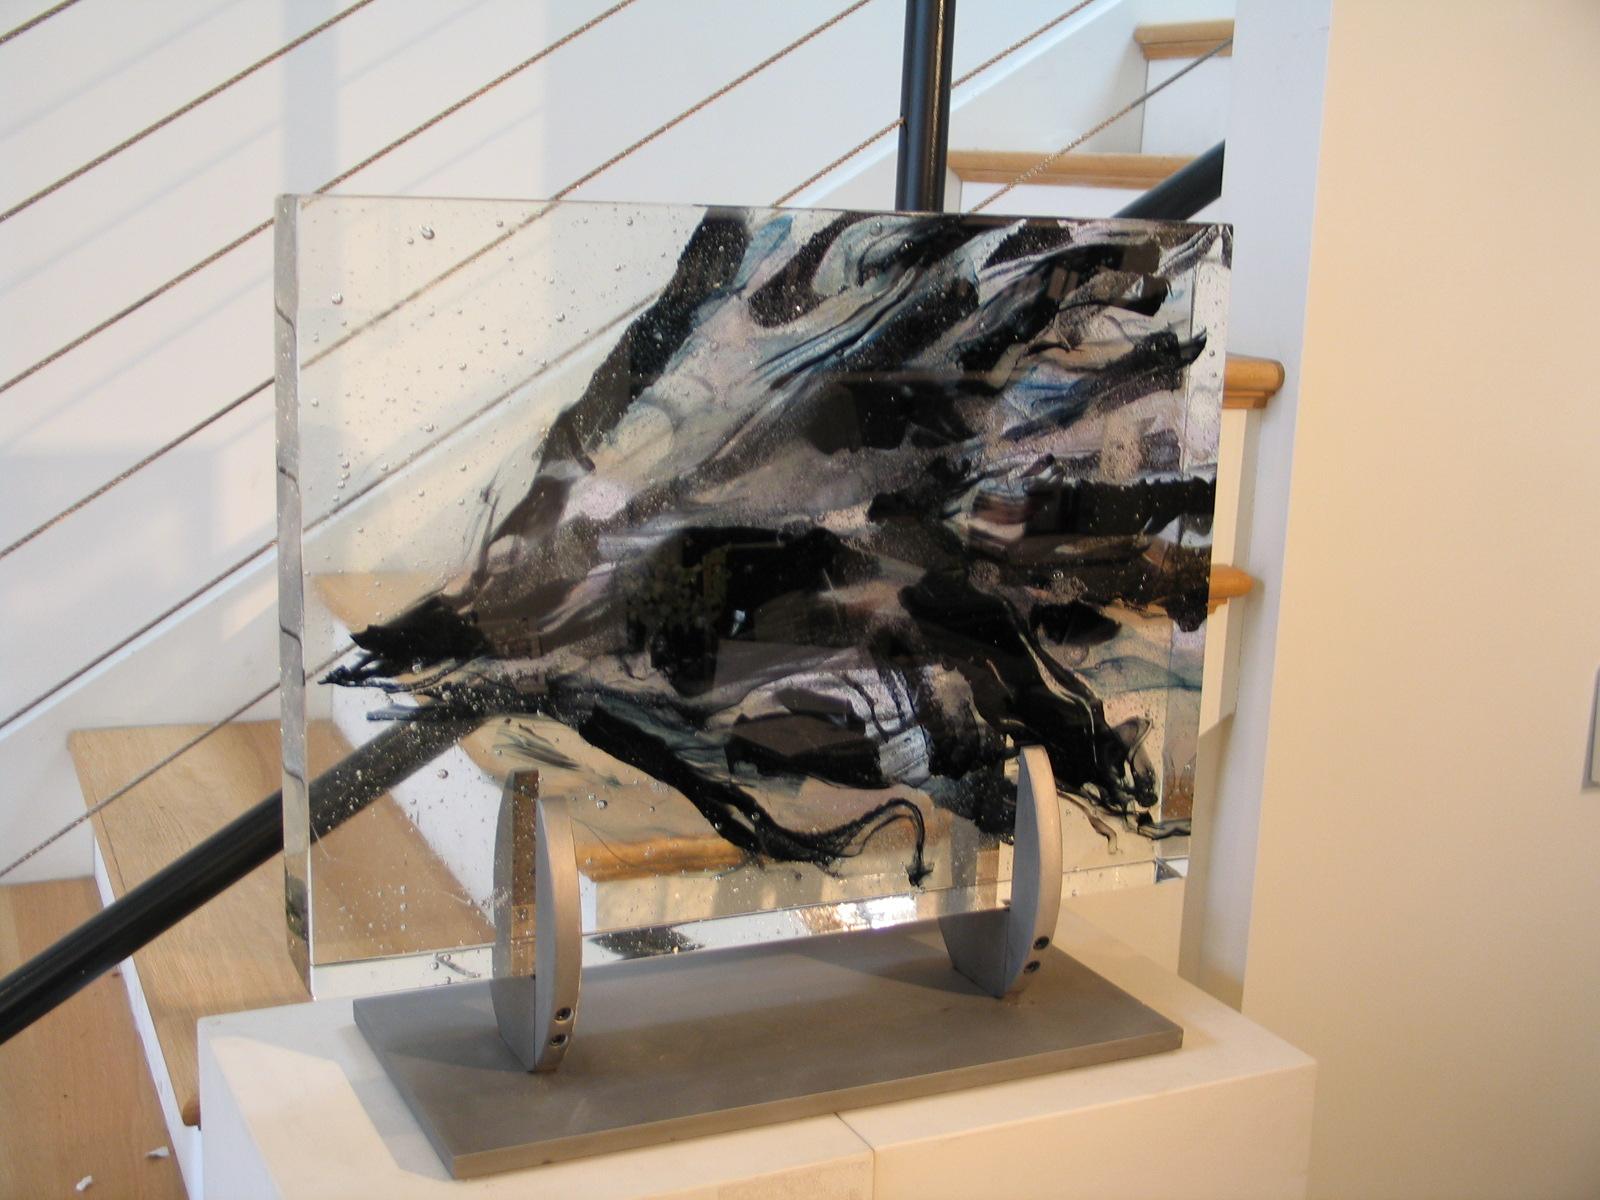 Abstract Cast Glass Sculpture, 'Haumi', 2004 by David Ruth For Sale 2